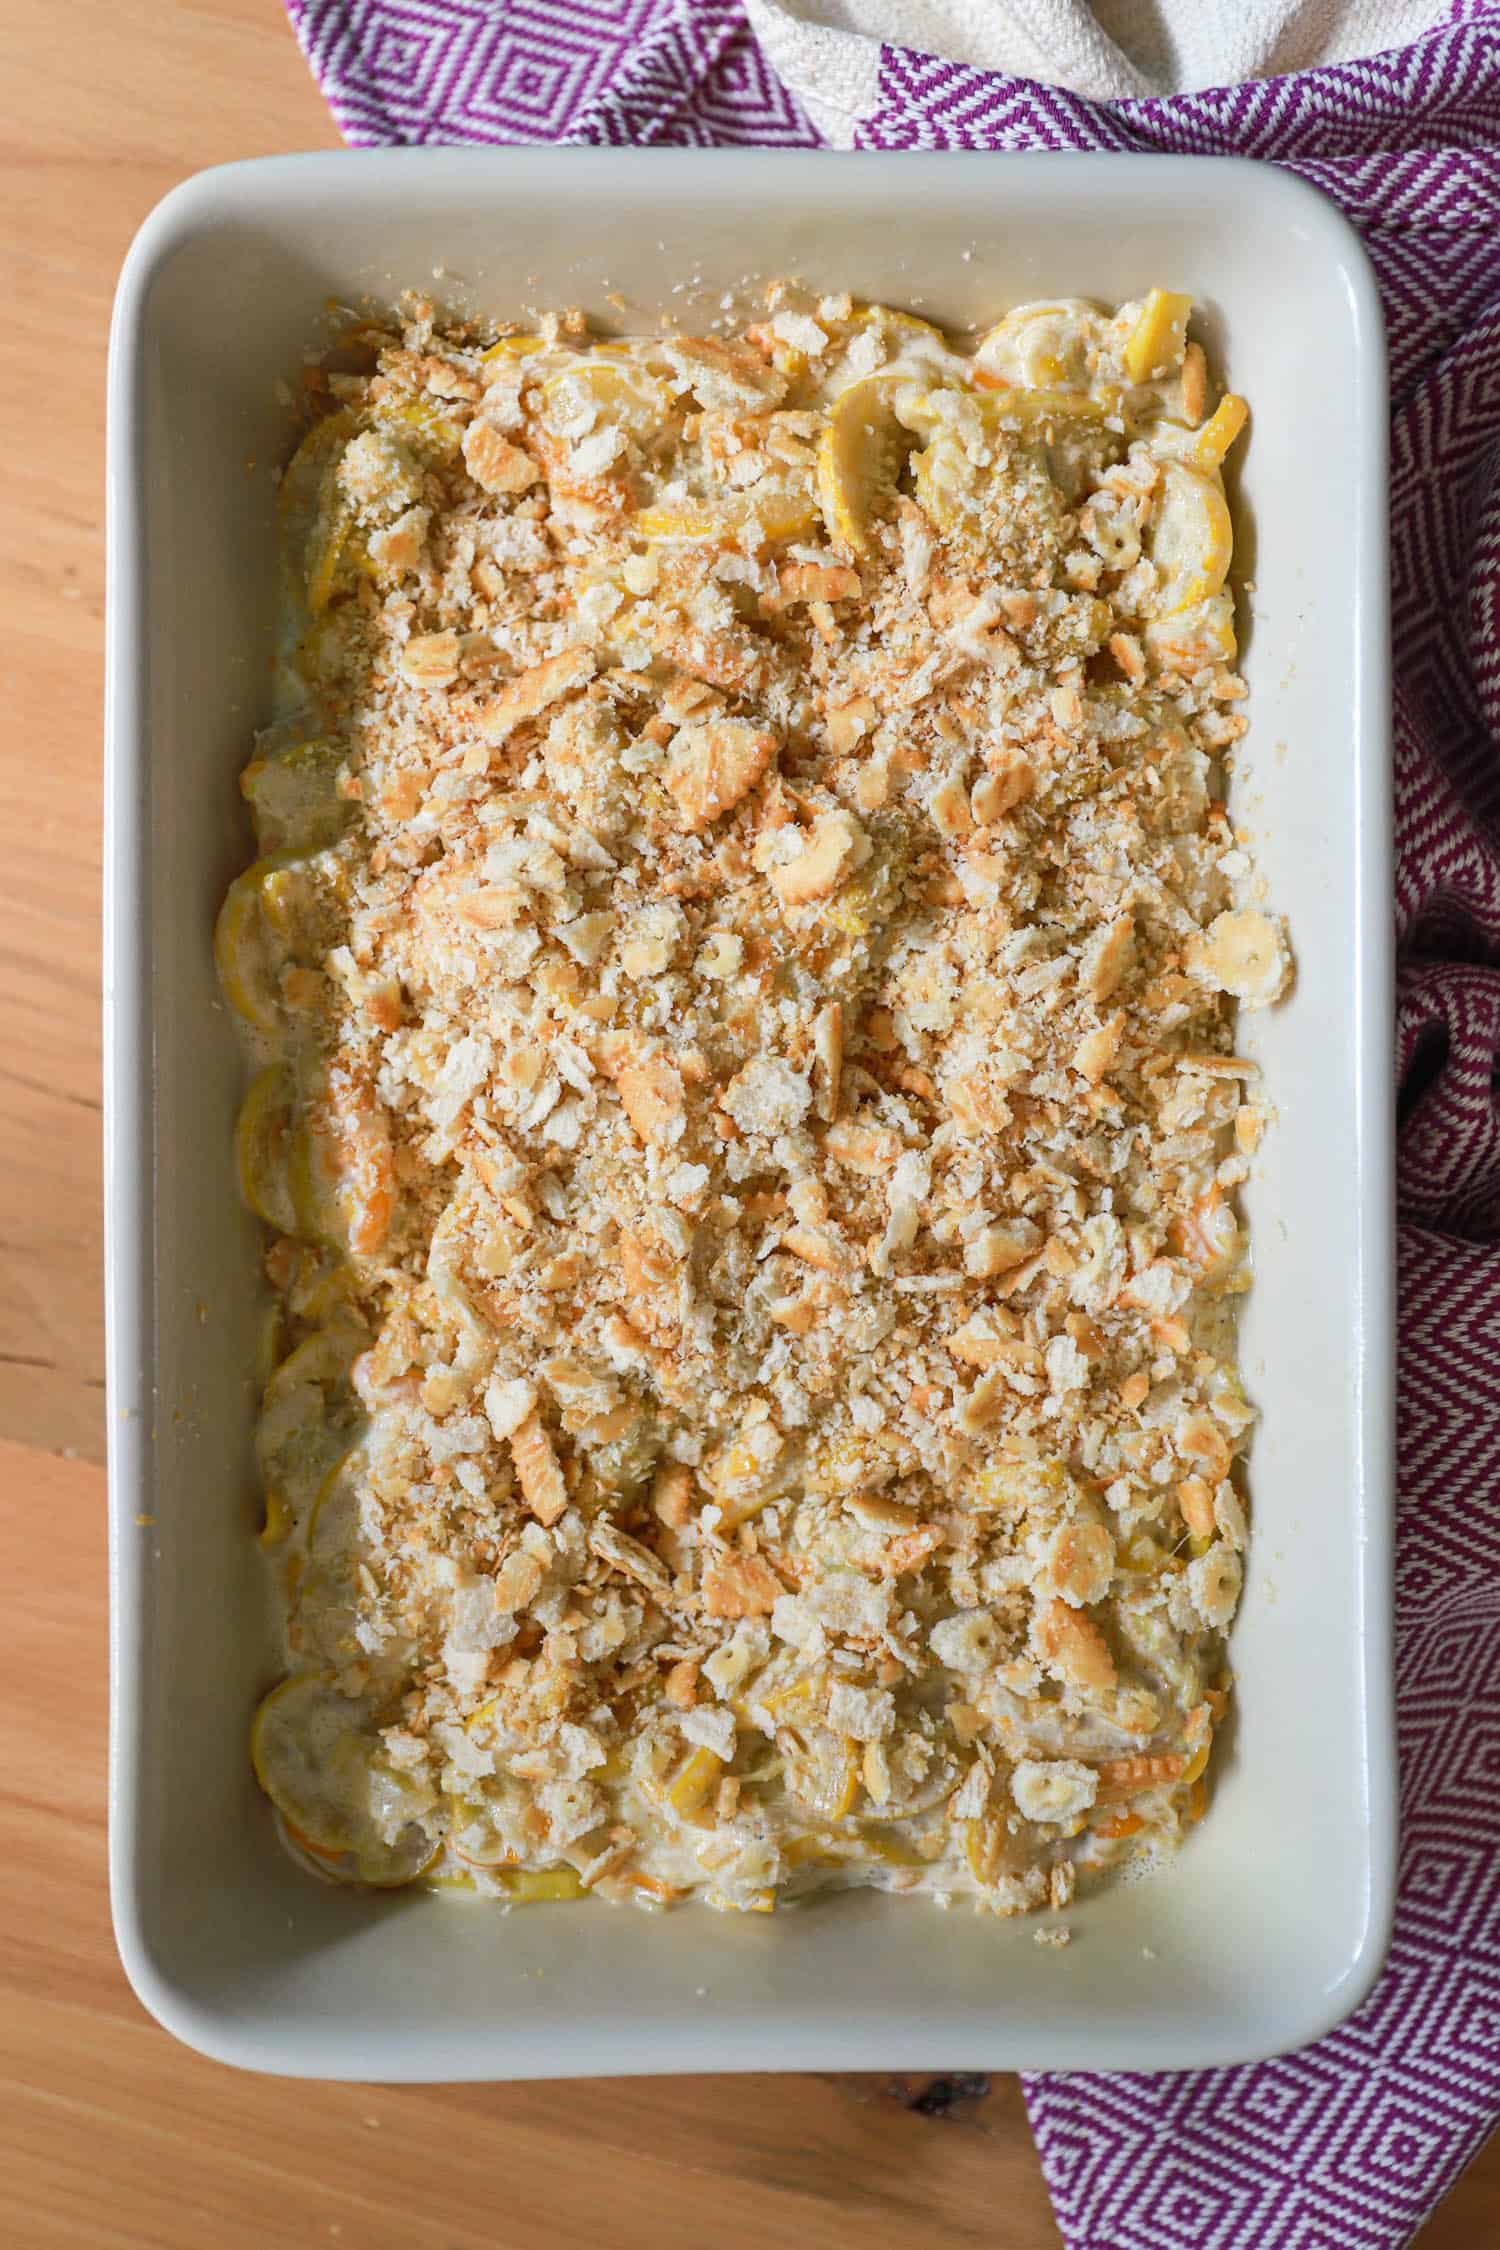 Large dish of unbaked squash casserole with crumbled Ritz crackers on top.